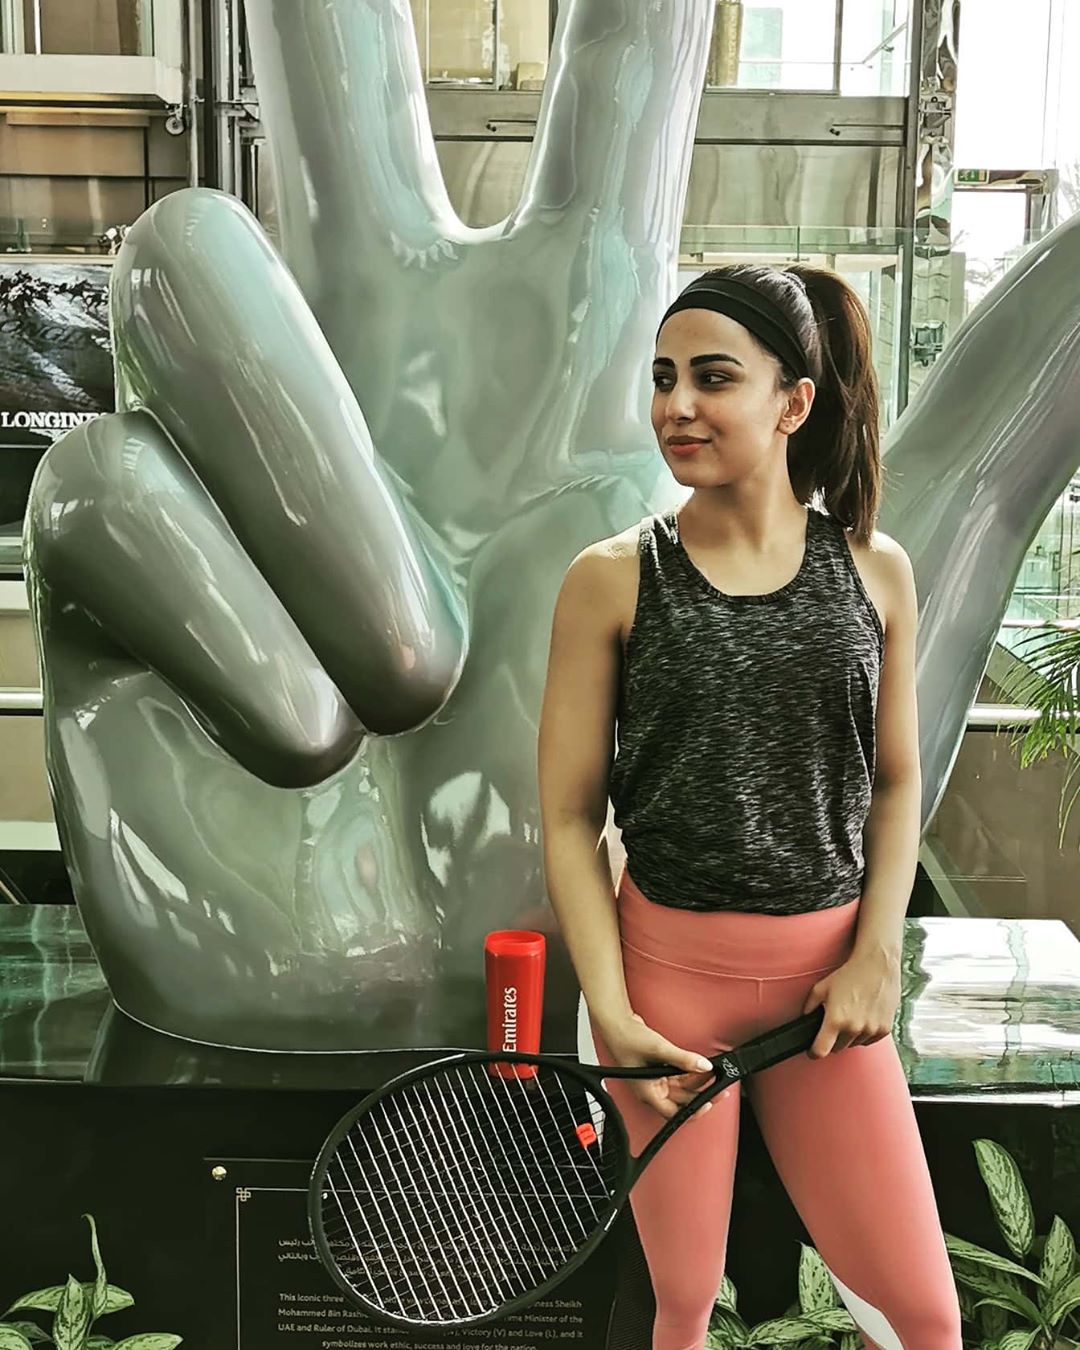 Latest Pictures of Actress Ushna Shah from her Visit to Dubai